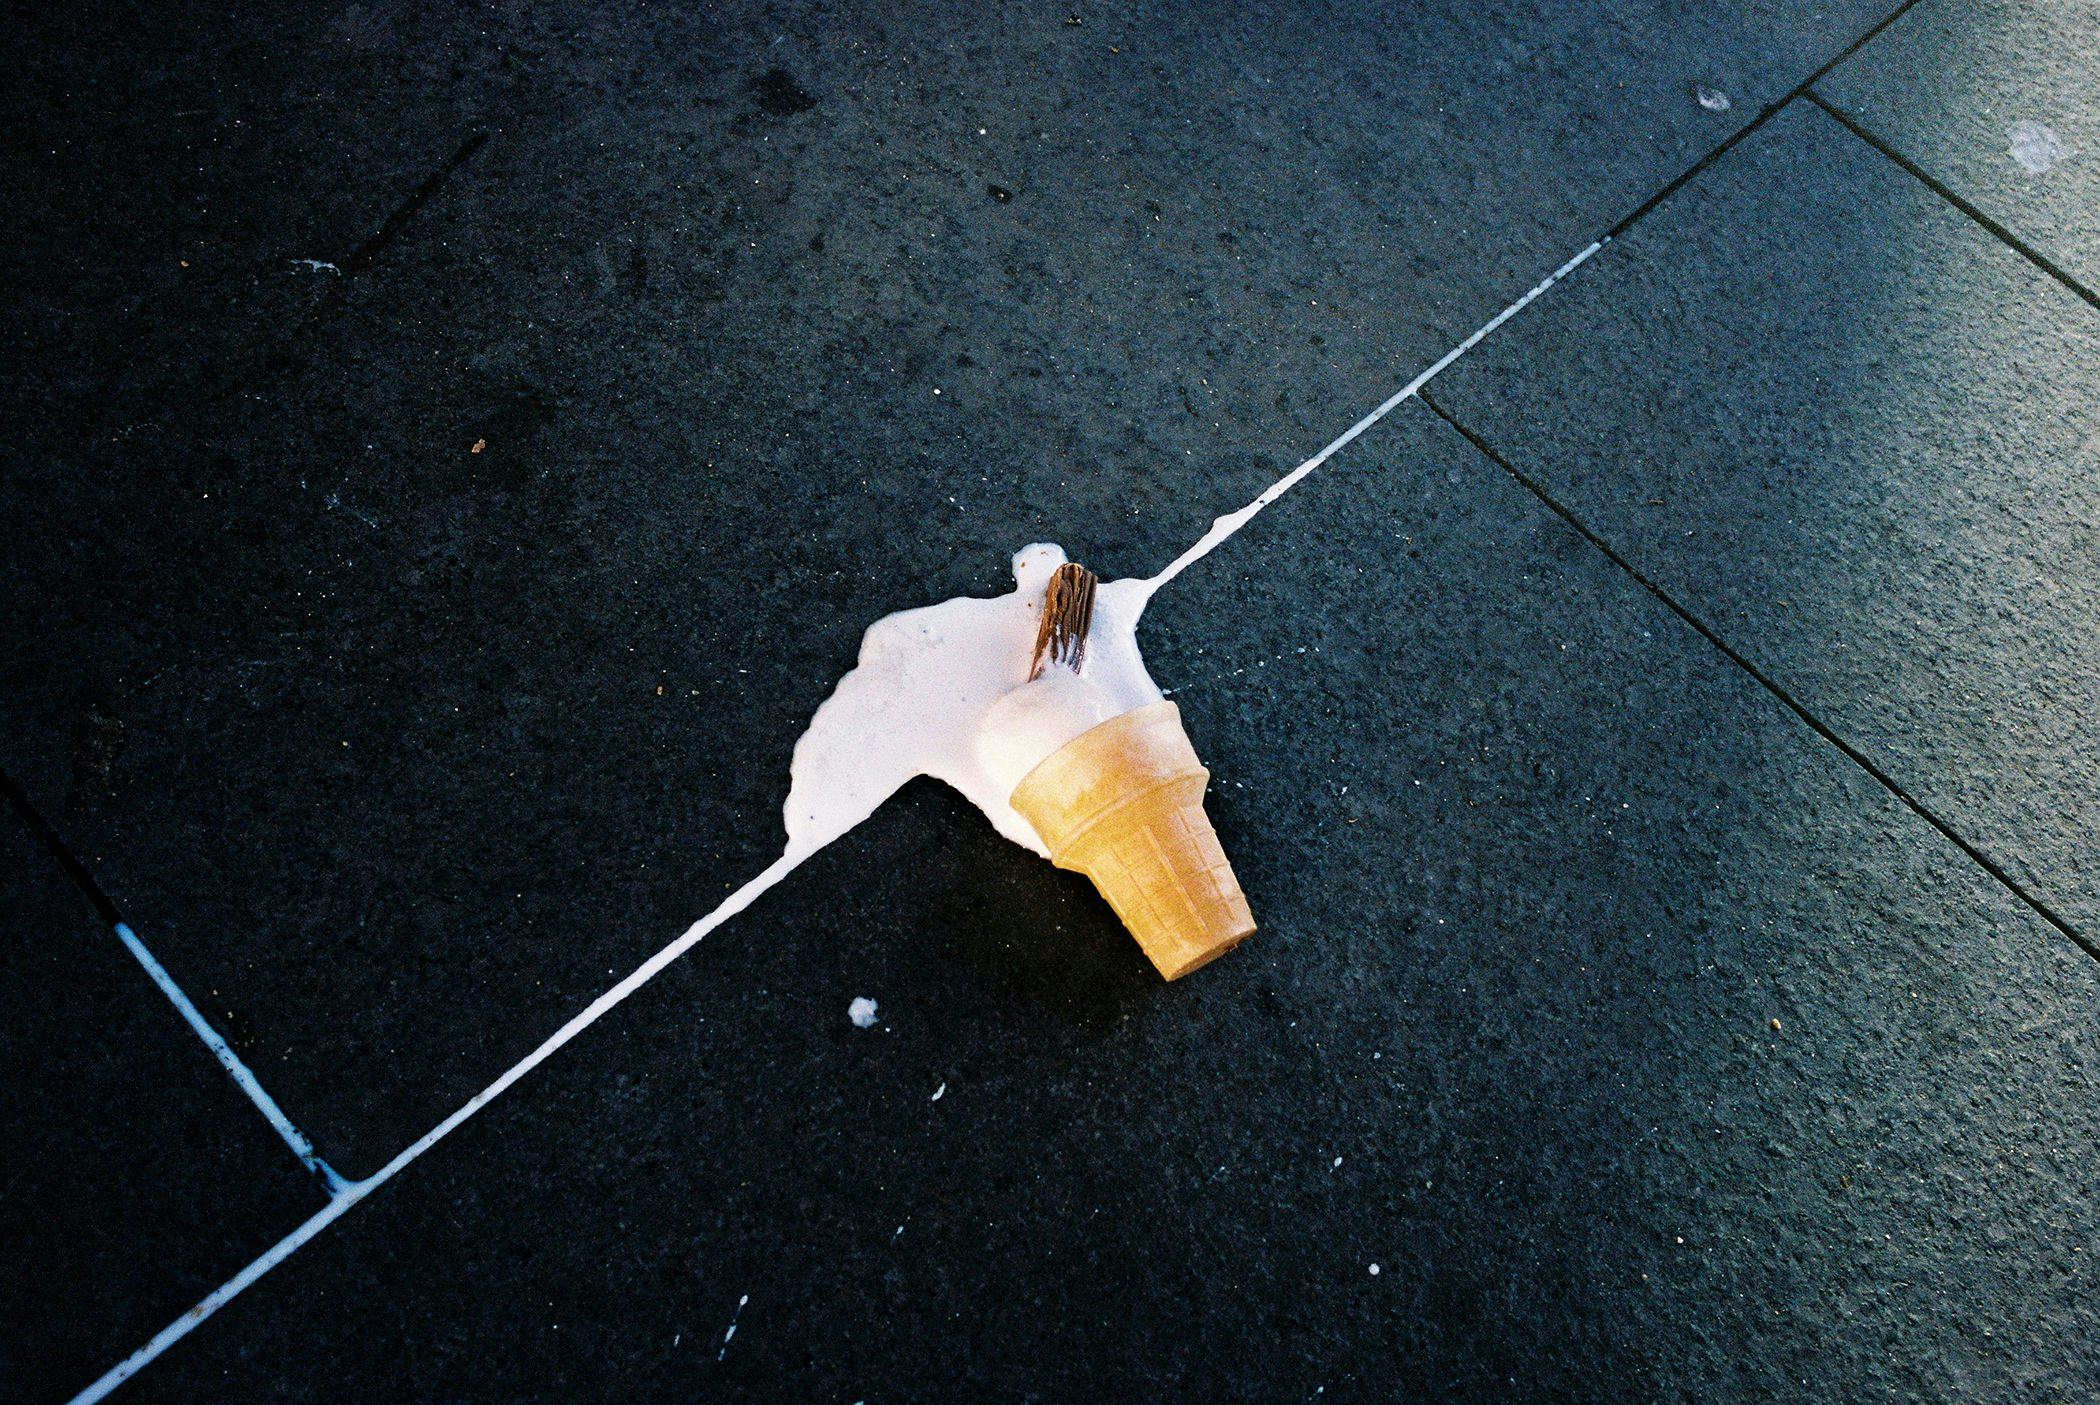 'Icecream with Flake, Sydney' by Natasha Cantwell, C-Type Photograph, Edition of 5